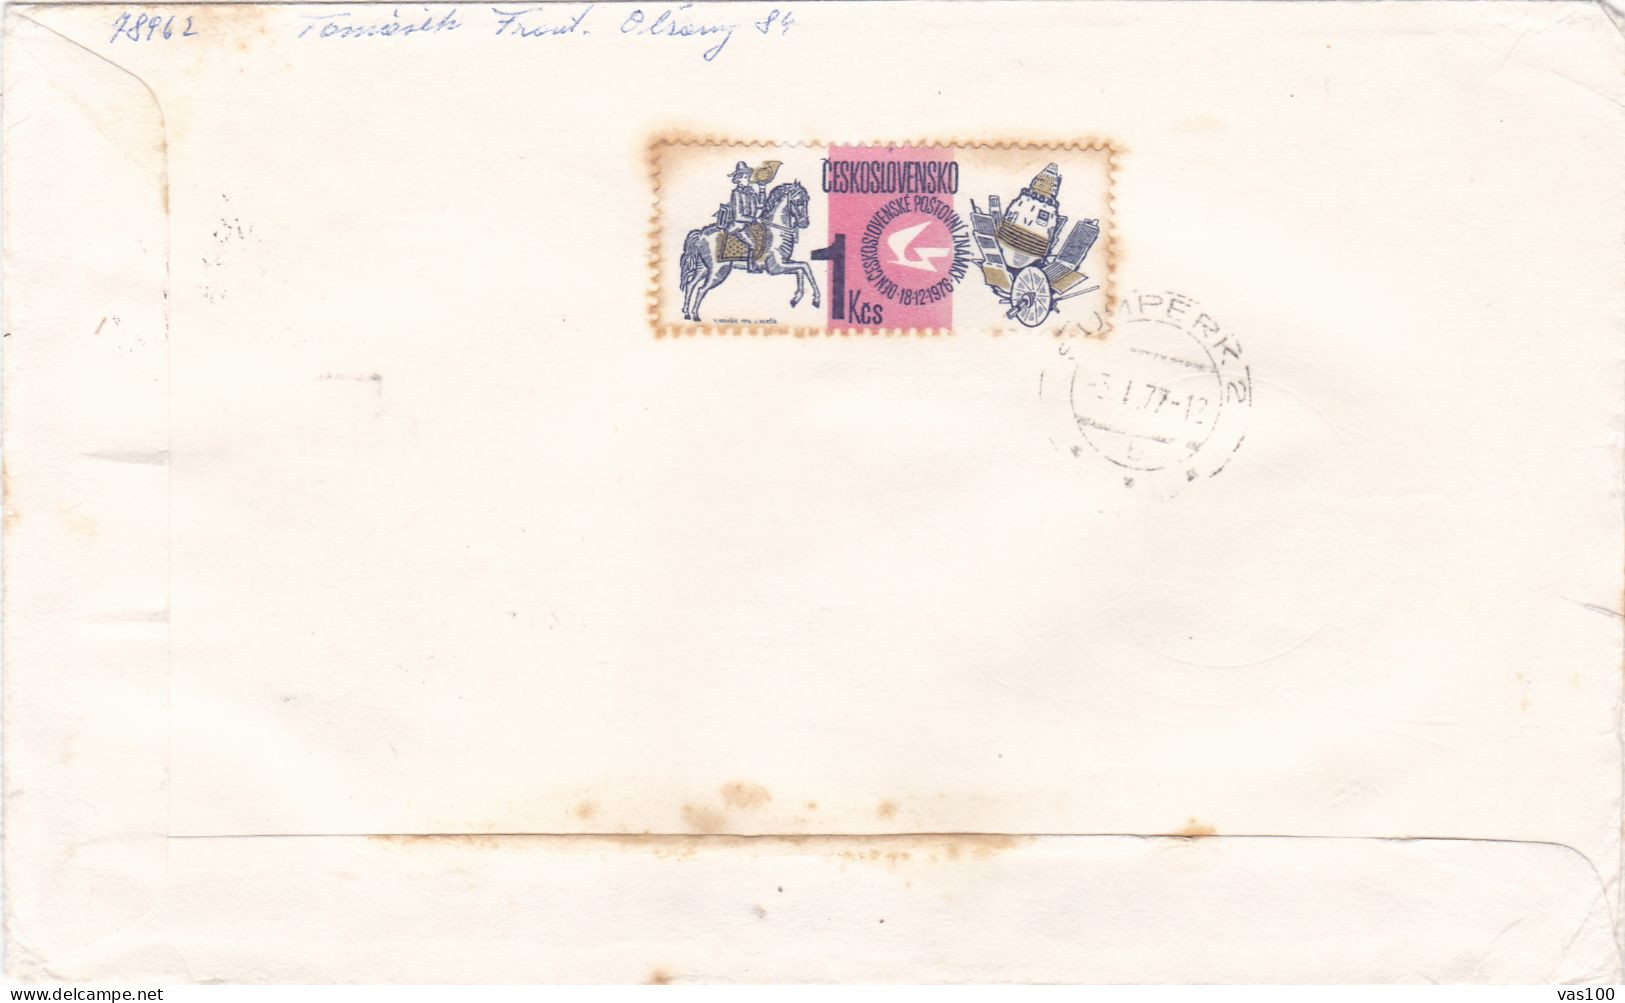 POST DAY COVERS  FDC  CIRCULATED 1976 Tchécoslovaquie - Covers & Documents